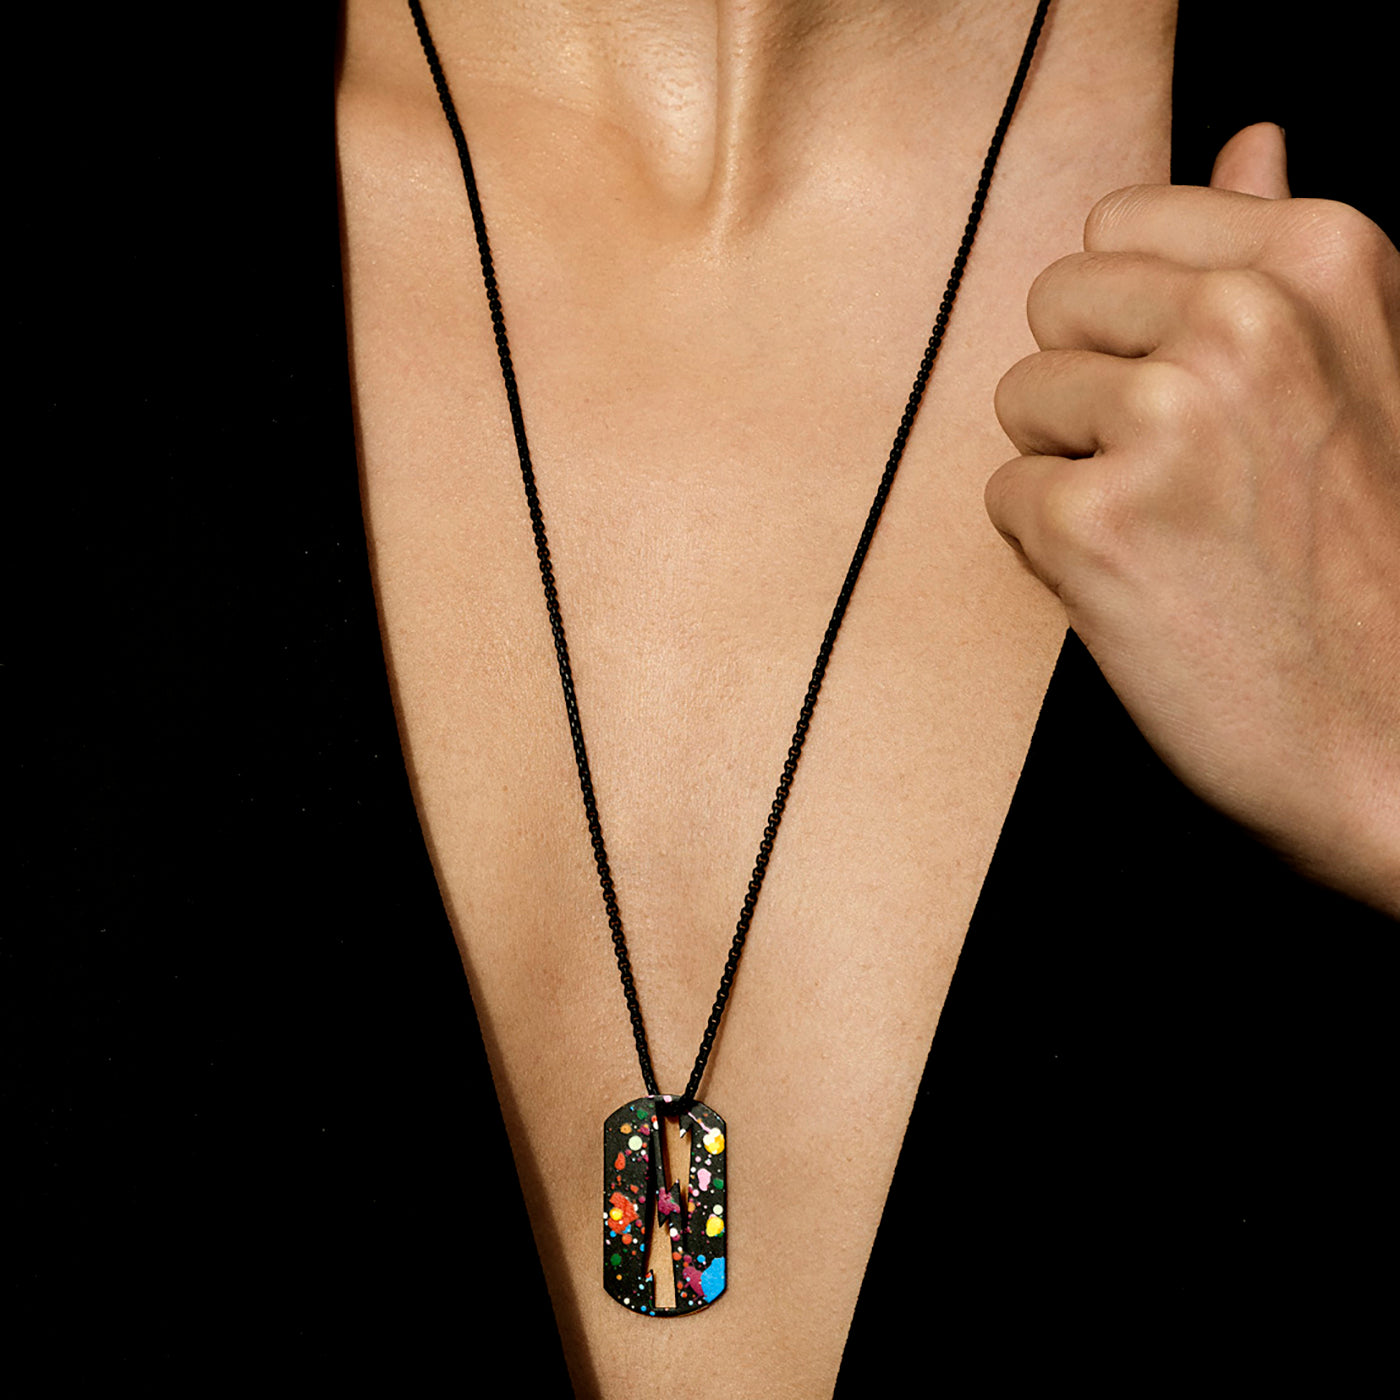 Lovetag x ZoulliArt necklace